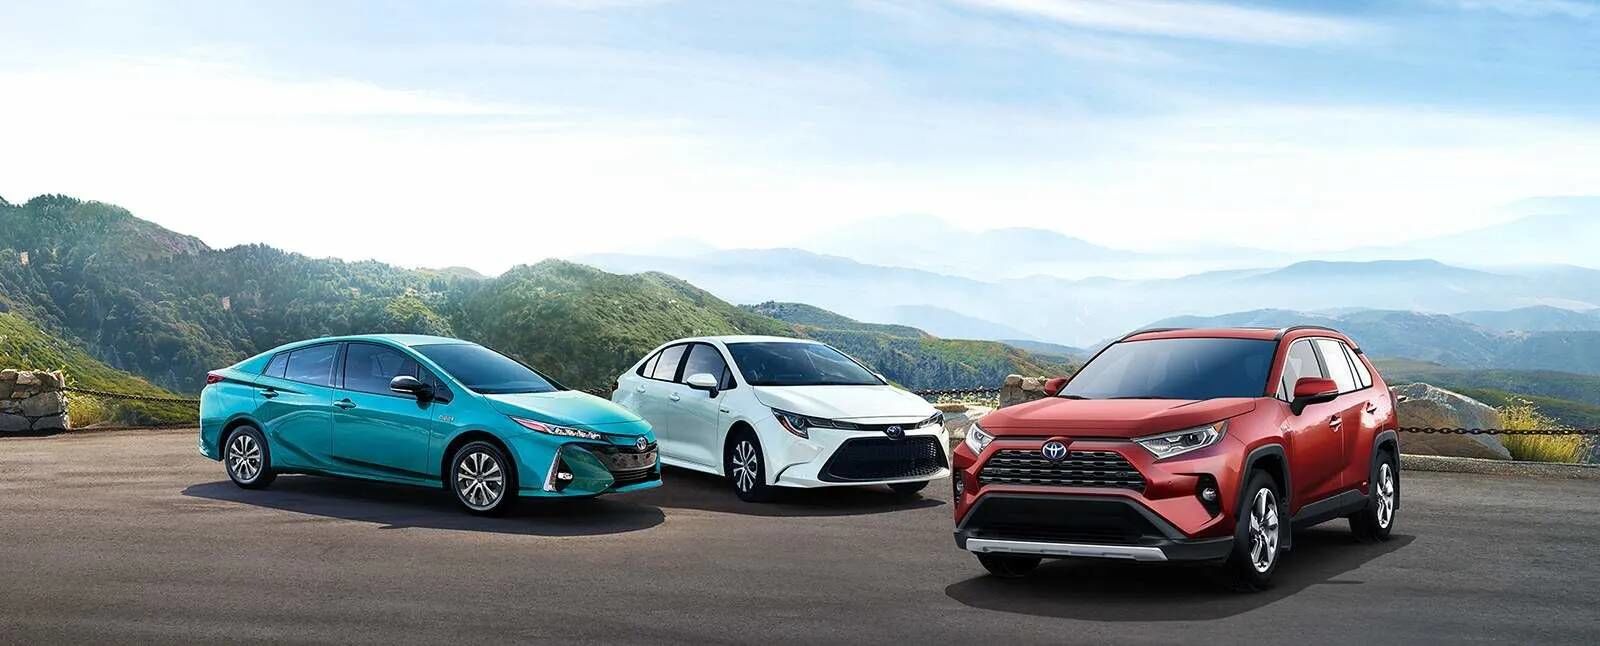 The advantages of choosing a Toyota hybrid vehicle